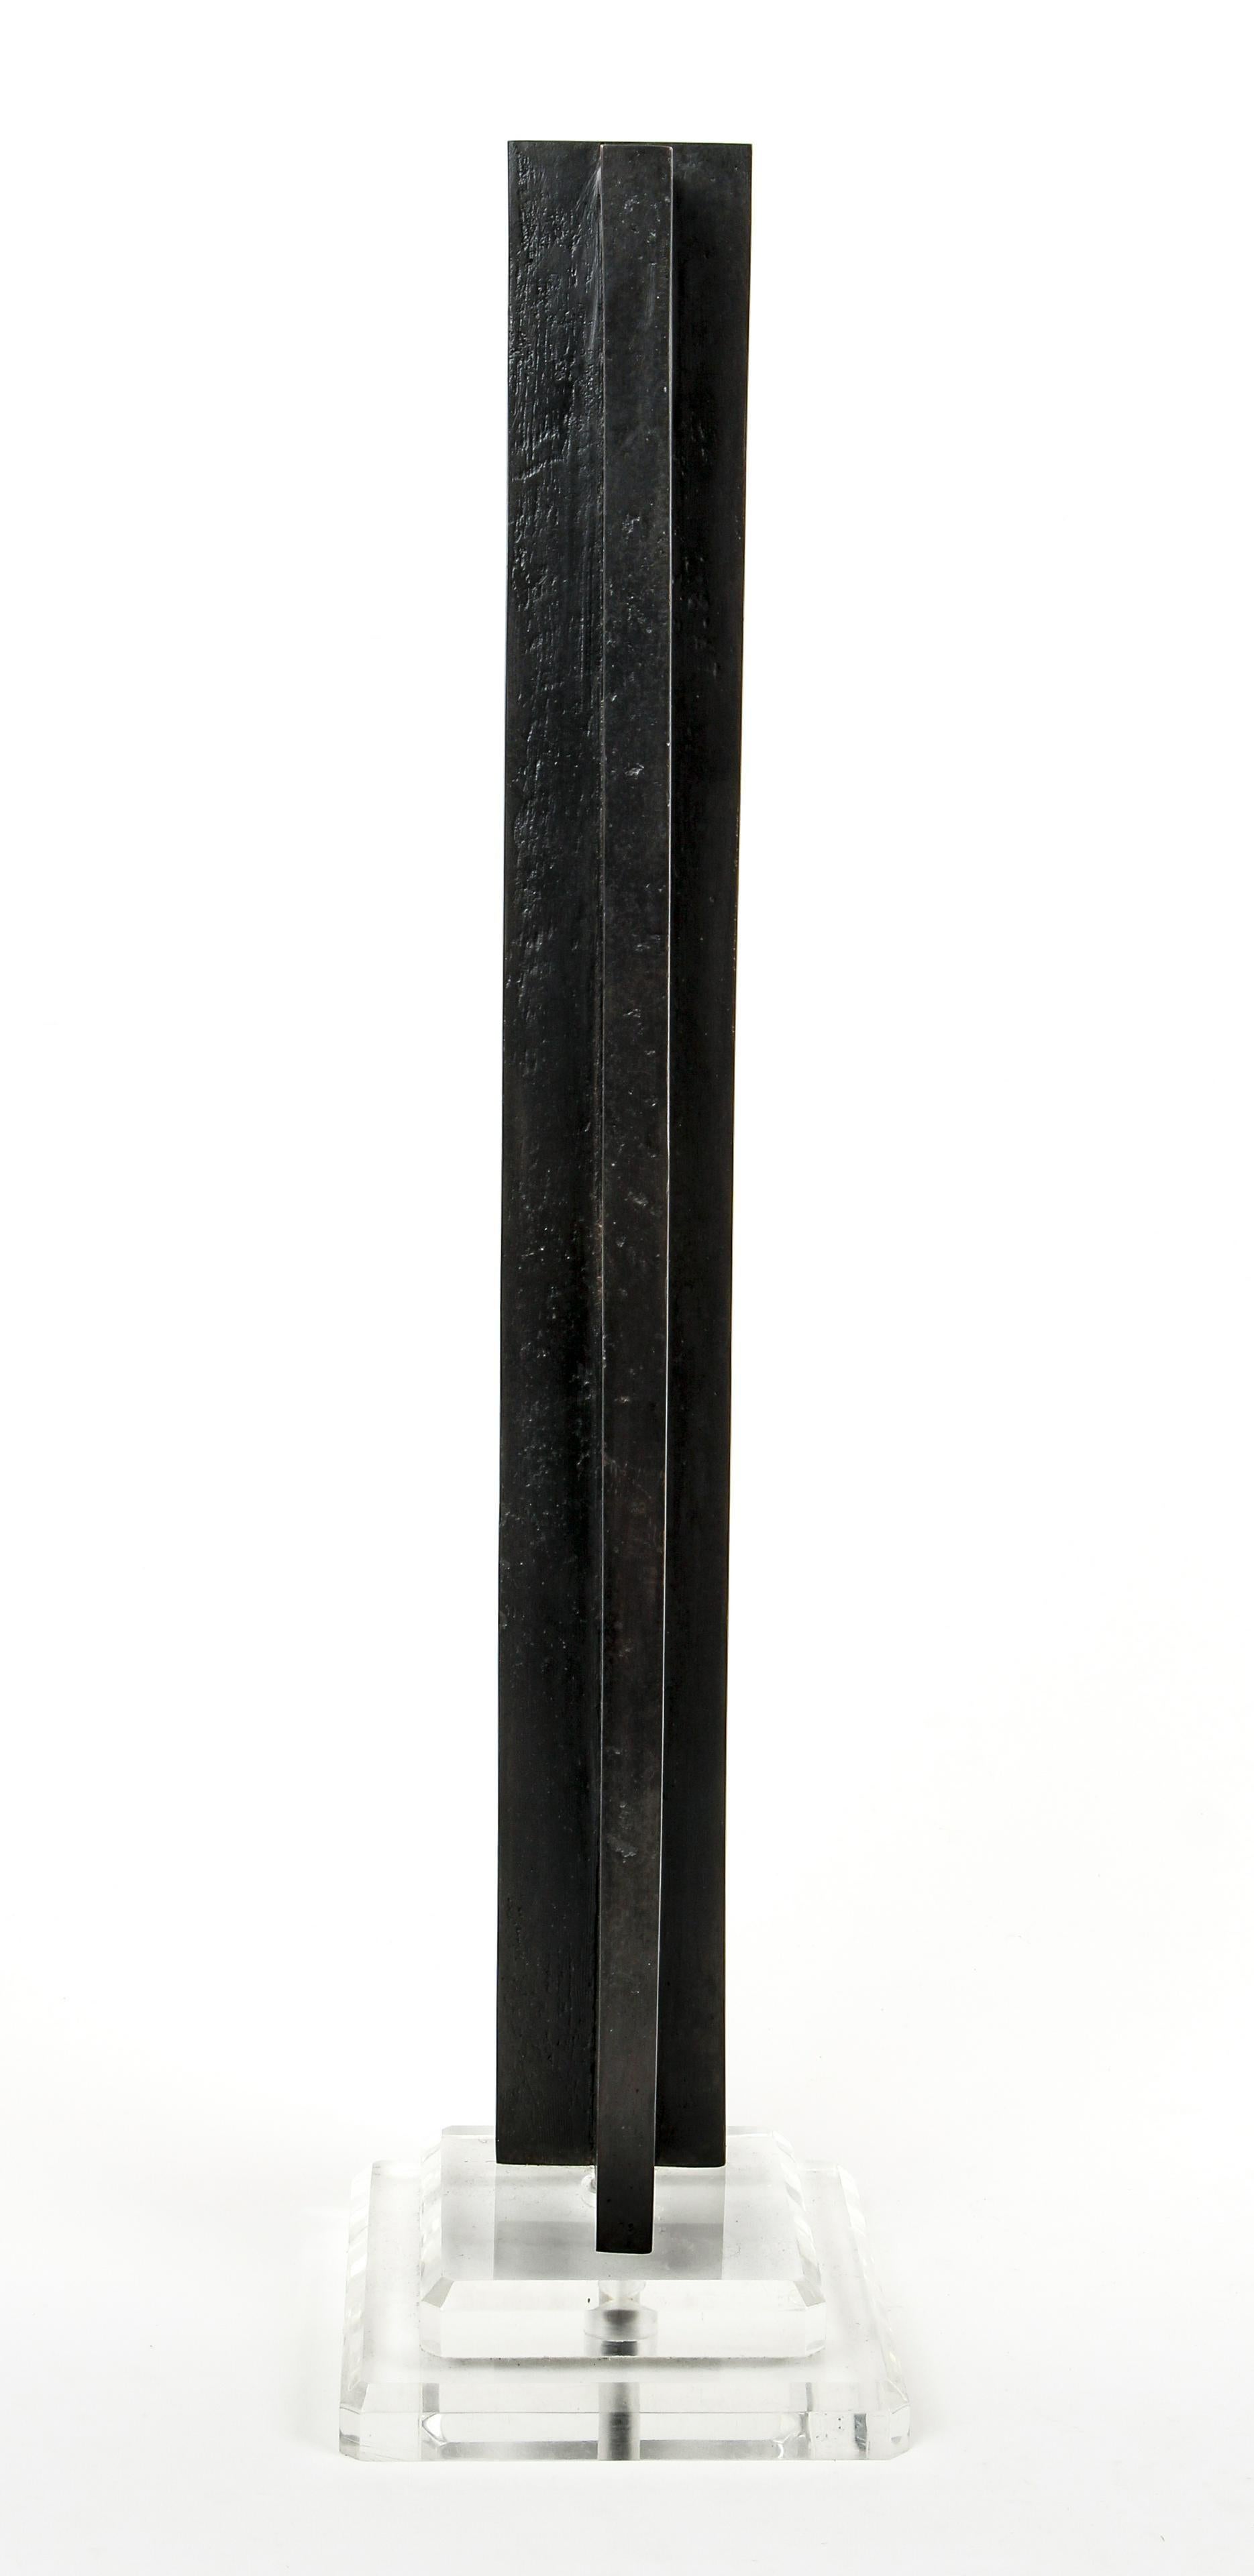 Alan Johnston (Scottish, born 1945), 
Untitled, 1988, cast bronze, edition of 2, cast #2 
Incised A.J. 2/2 88 on underside
Provenance: Jack Tilton Gallery, NY
This is a weighty, solid bronze sculpture mounted to a clear, lucite, acrylic or